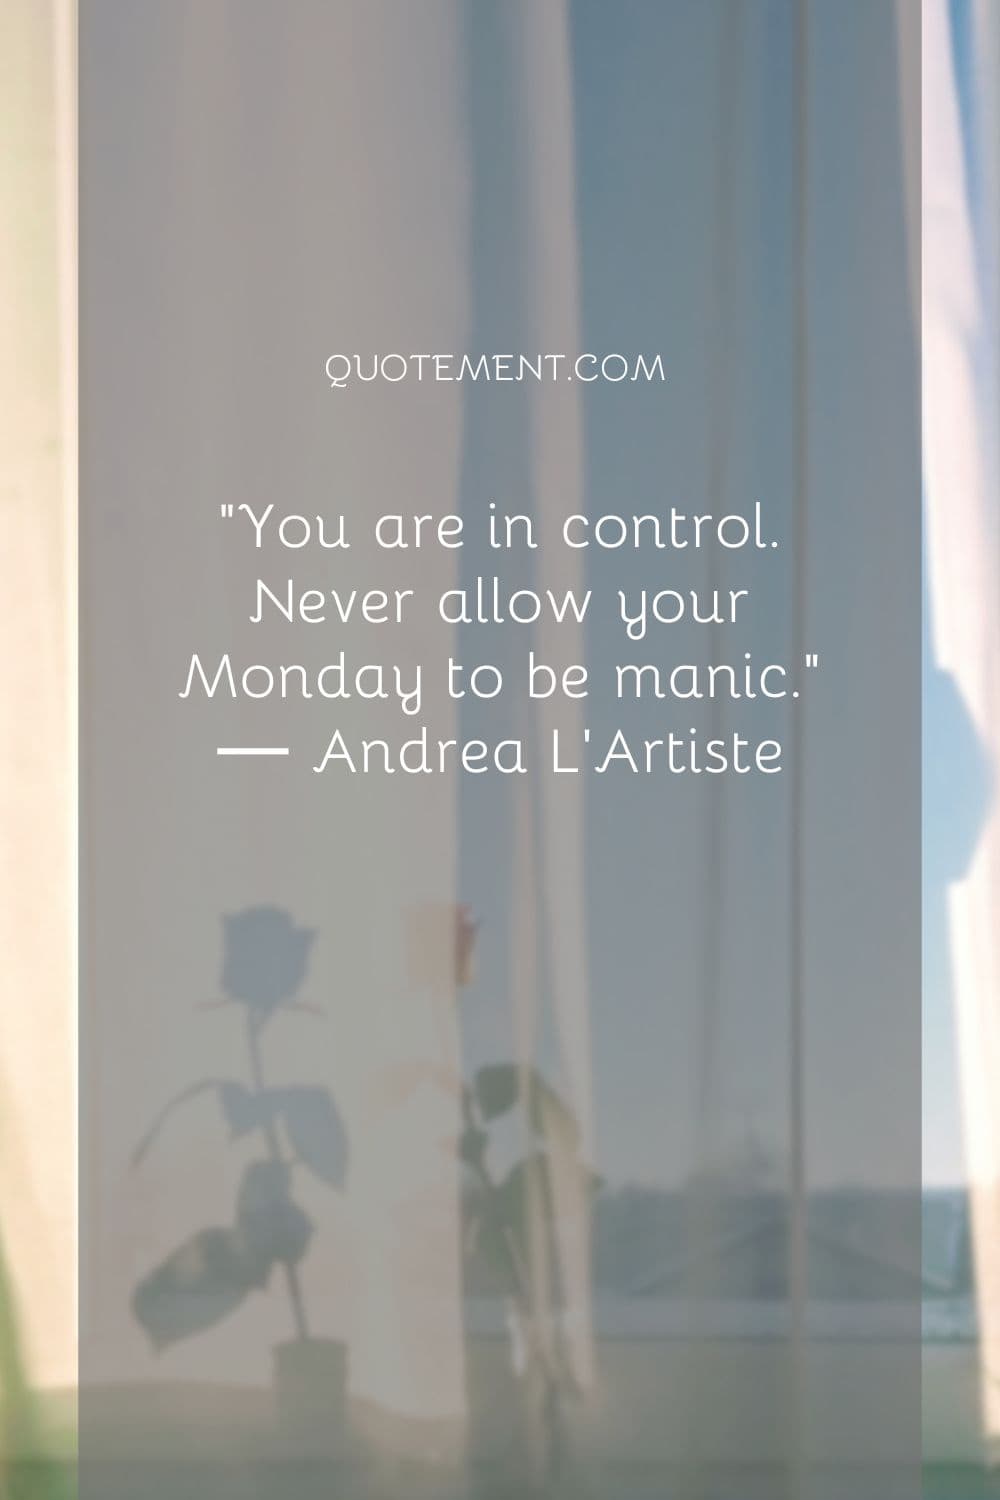 You are in control. Never allow your Monday to be manic